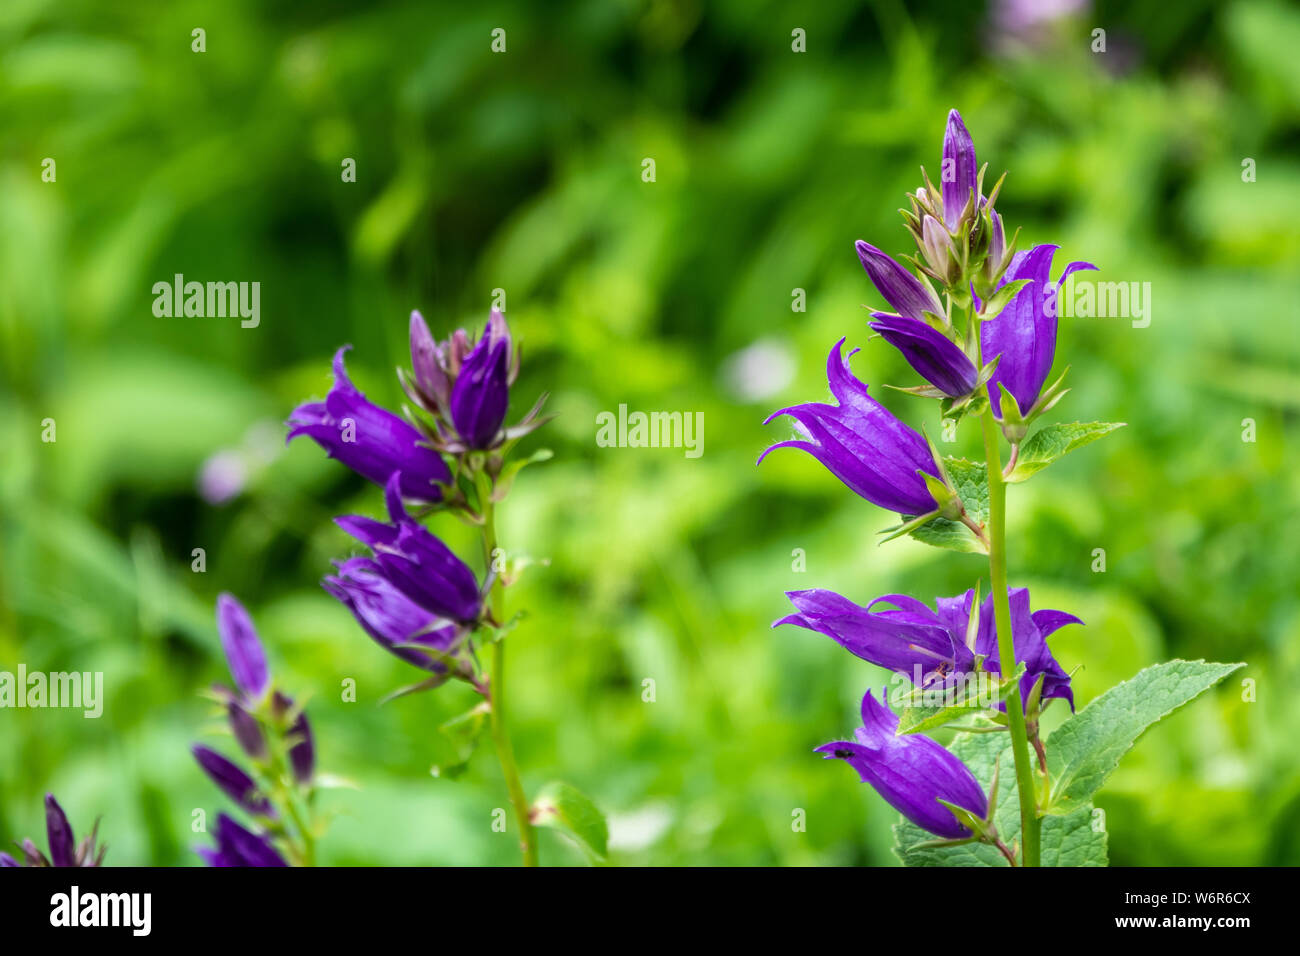 Campanula persicifolia, the peach-leaved bellflower,is a flowering plant species in the family Campanulaceae Stock Photo